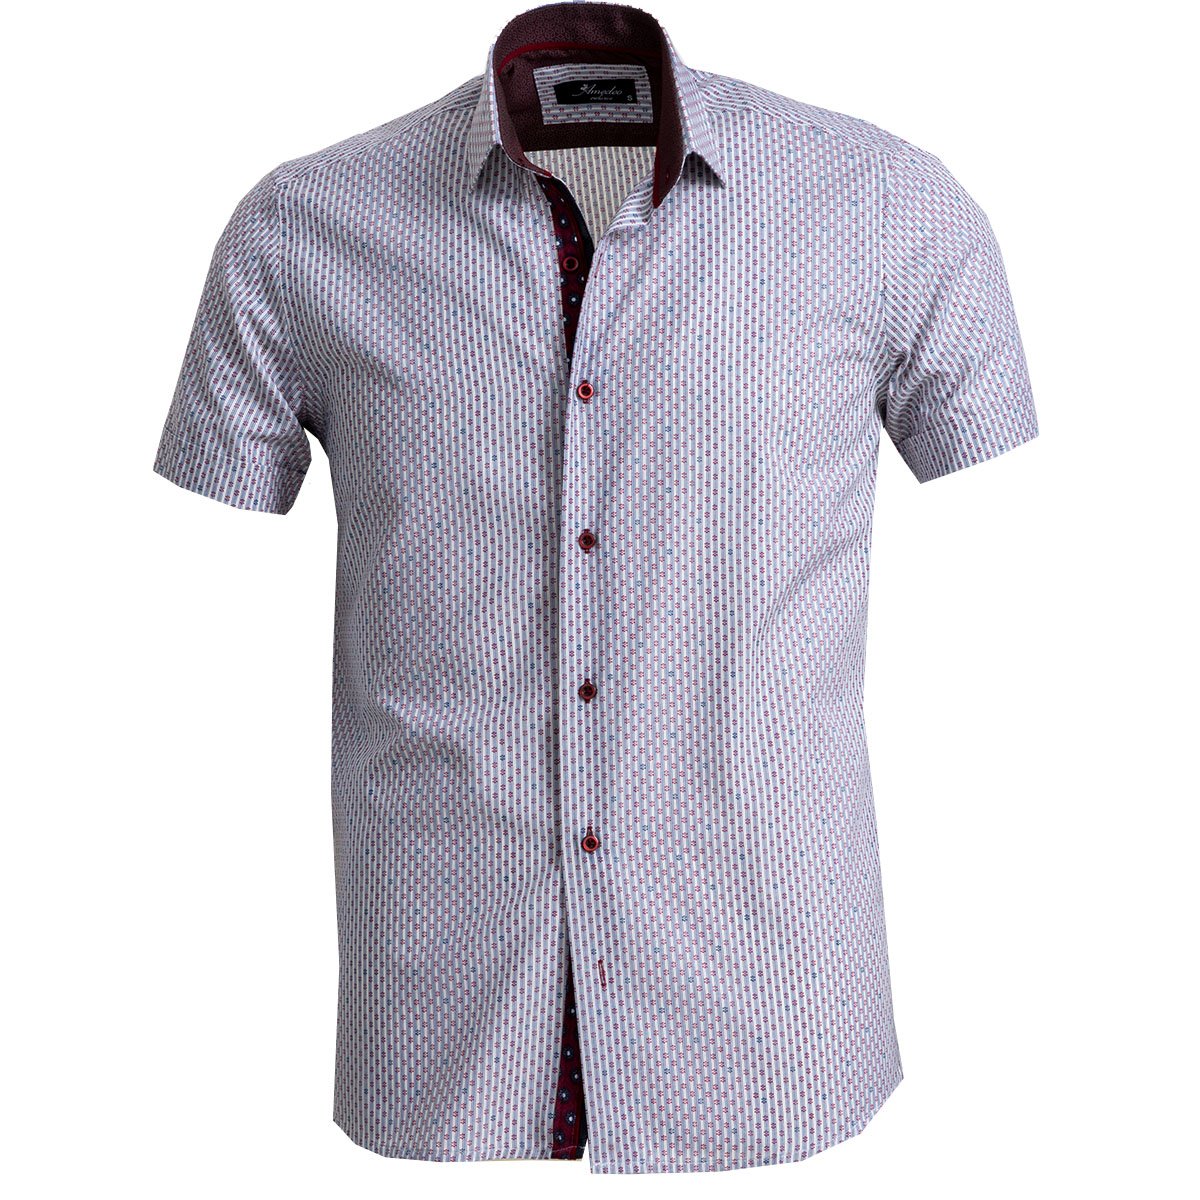 Men's Button down Tailor Fit Soft 100% Cotton Short Sleeve Dress Shirt Beige Burgundy casual And Formal - Amedeo Exclusive